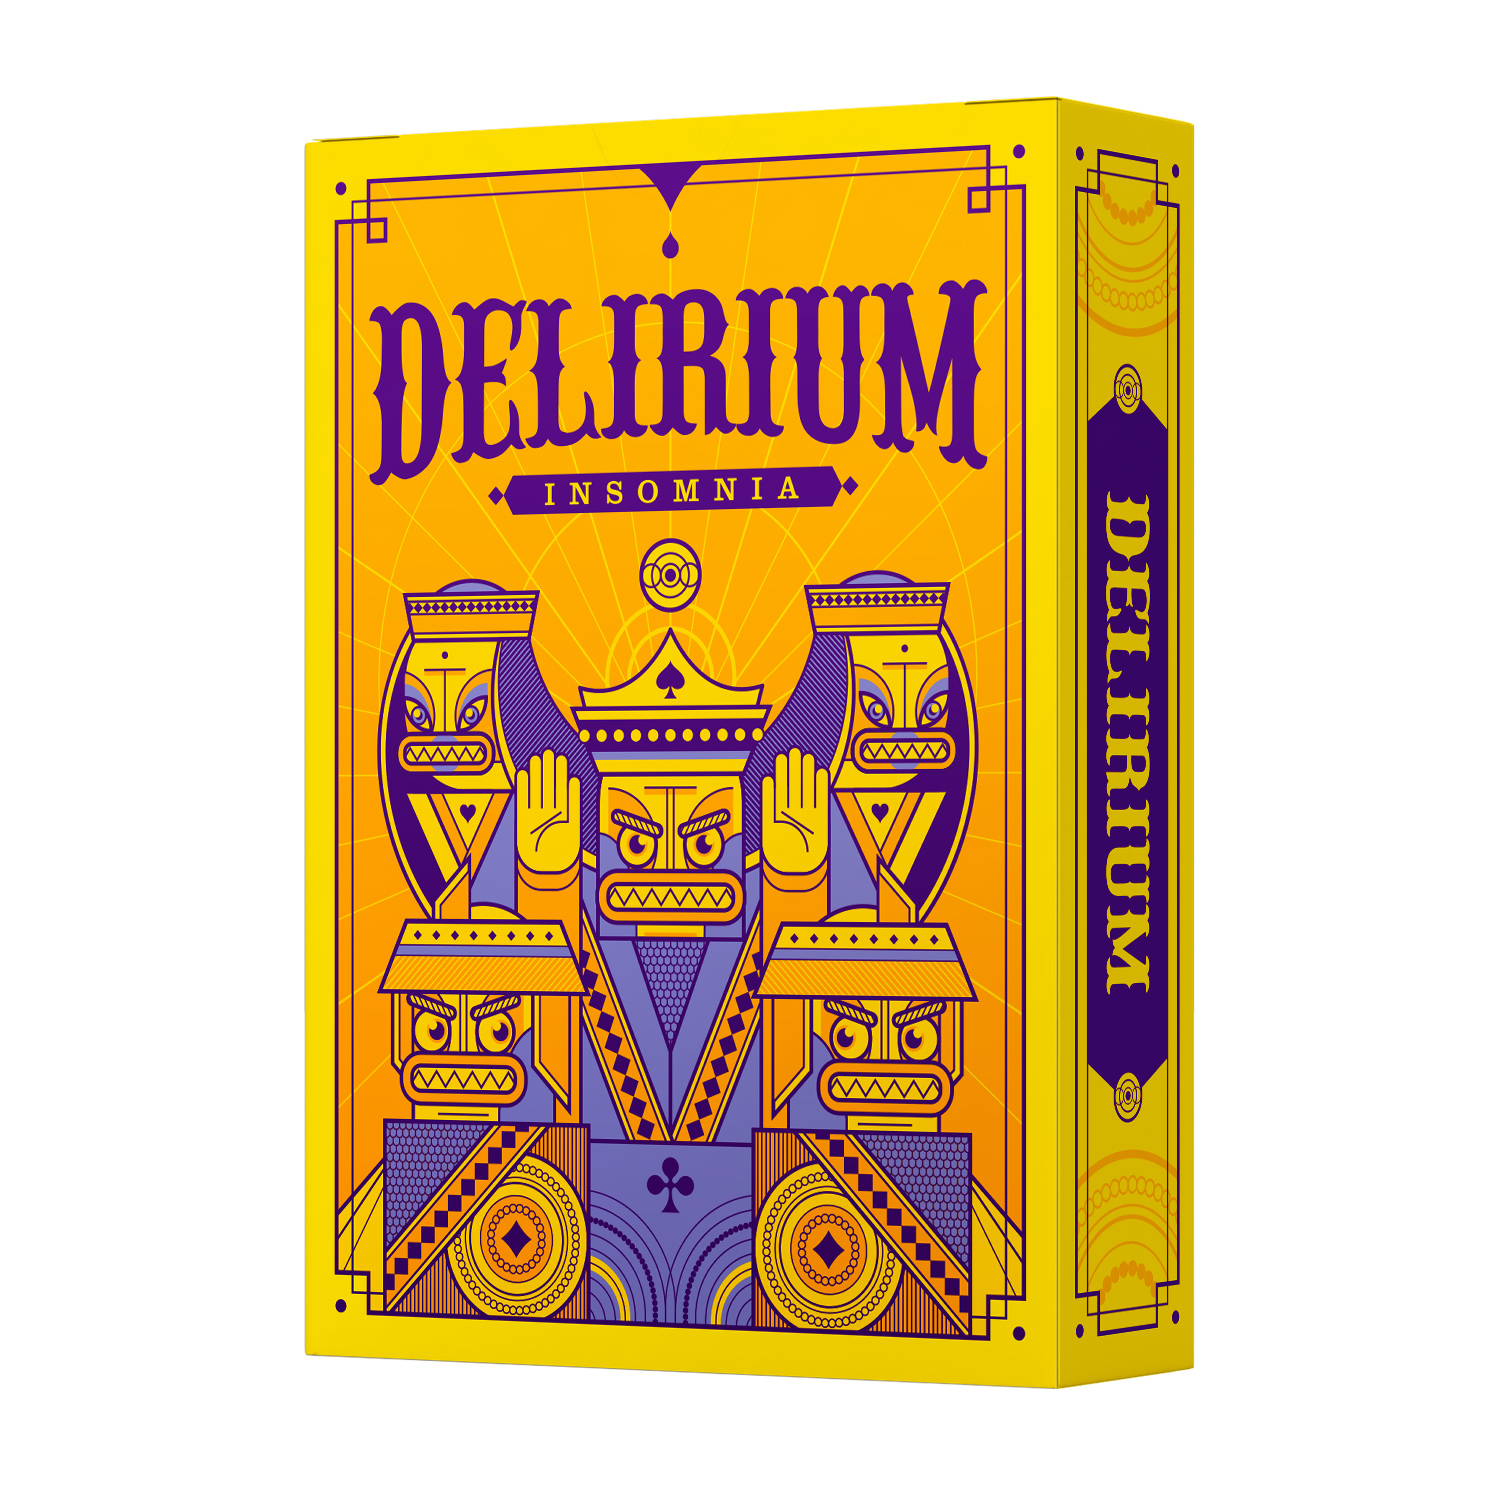 1 deck Delirium Absolute playing cards-S103049326-戊C2 